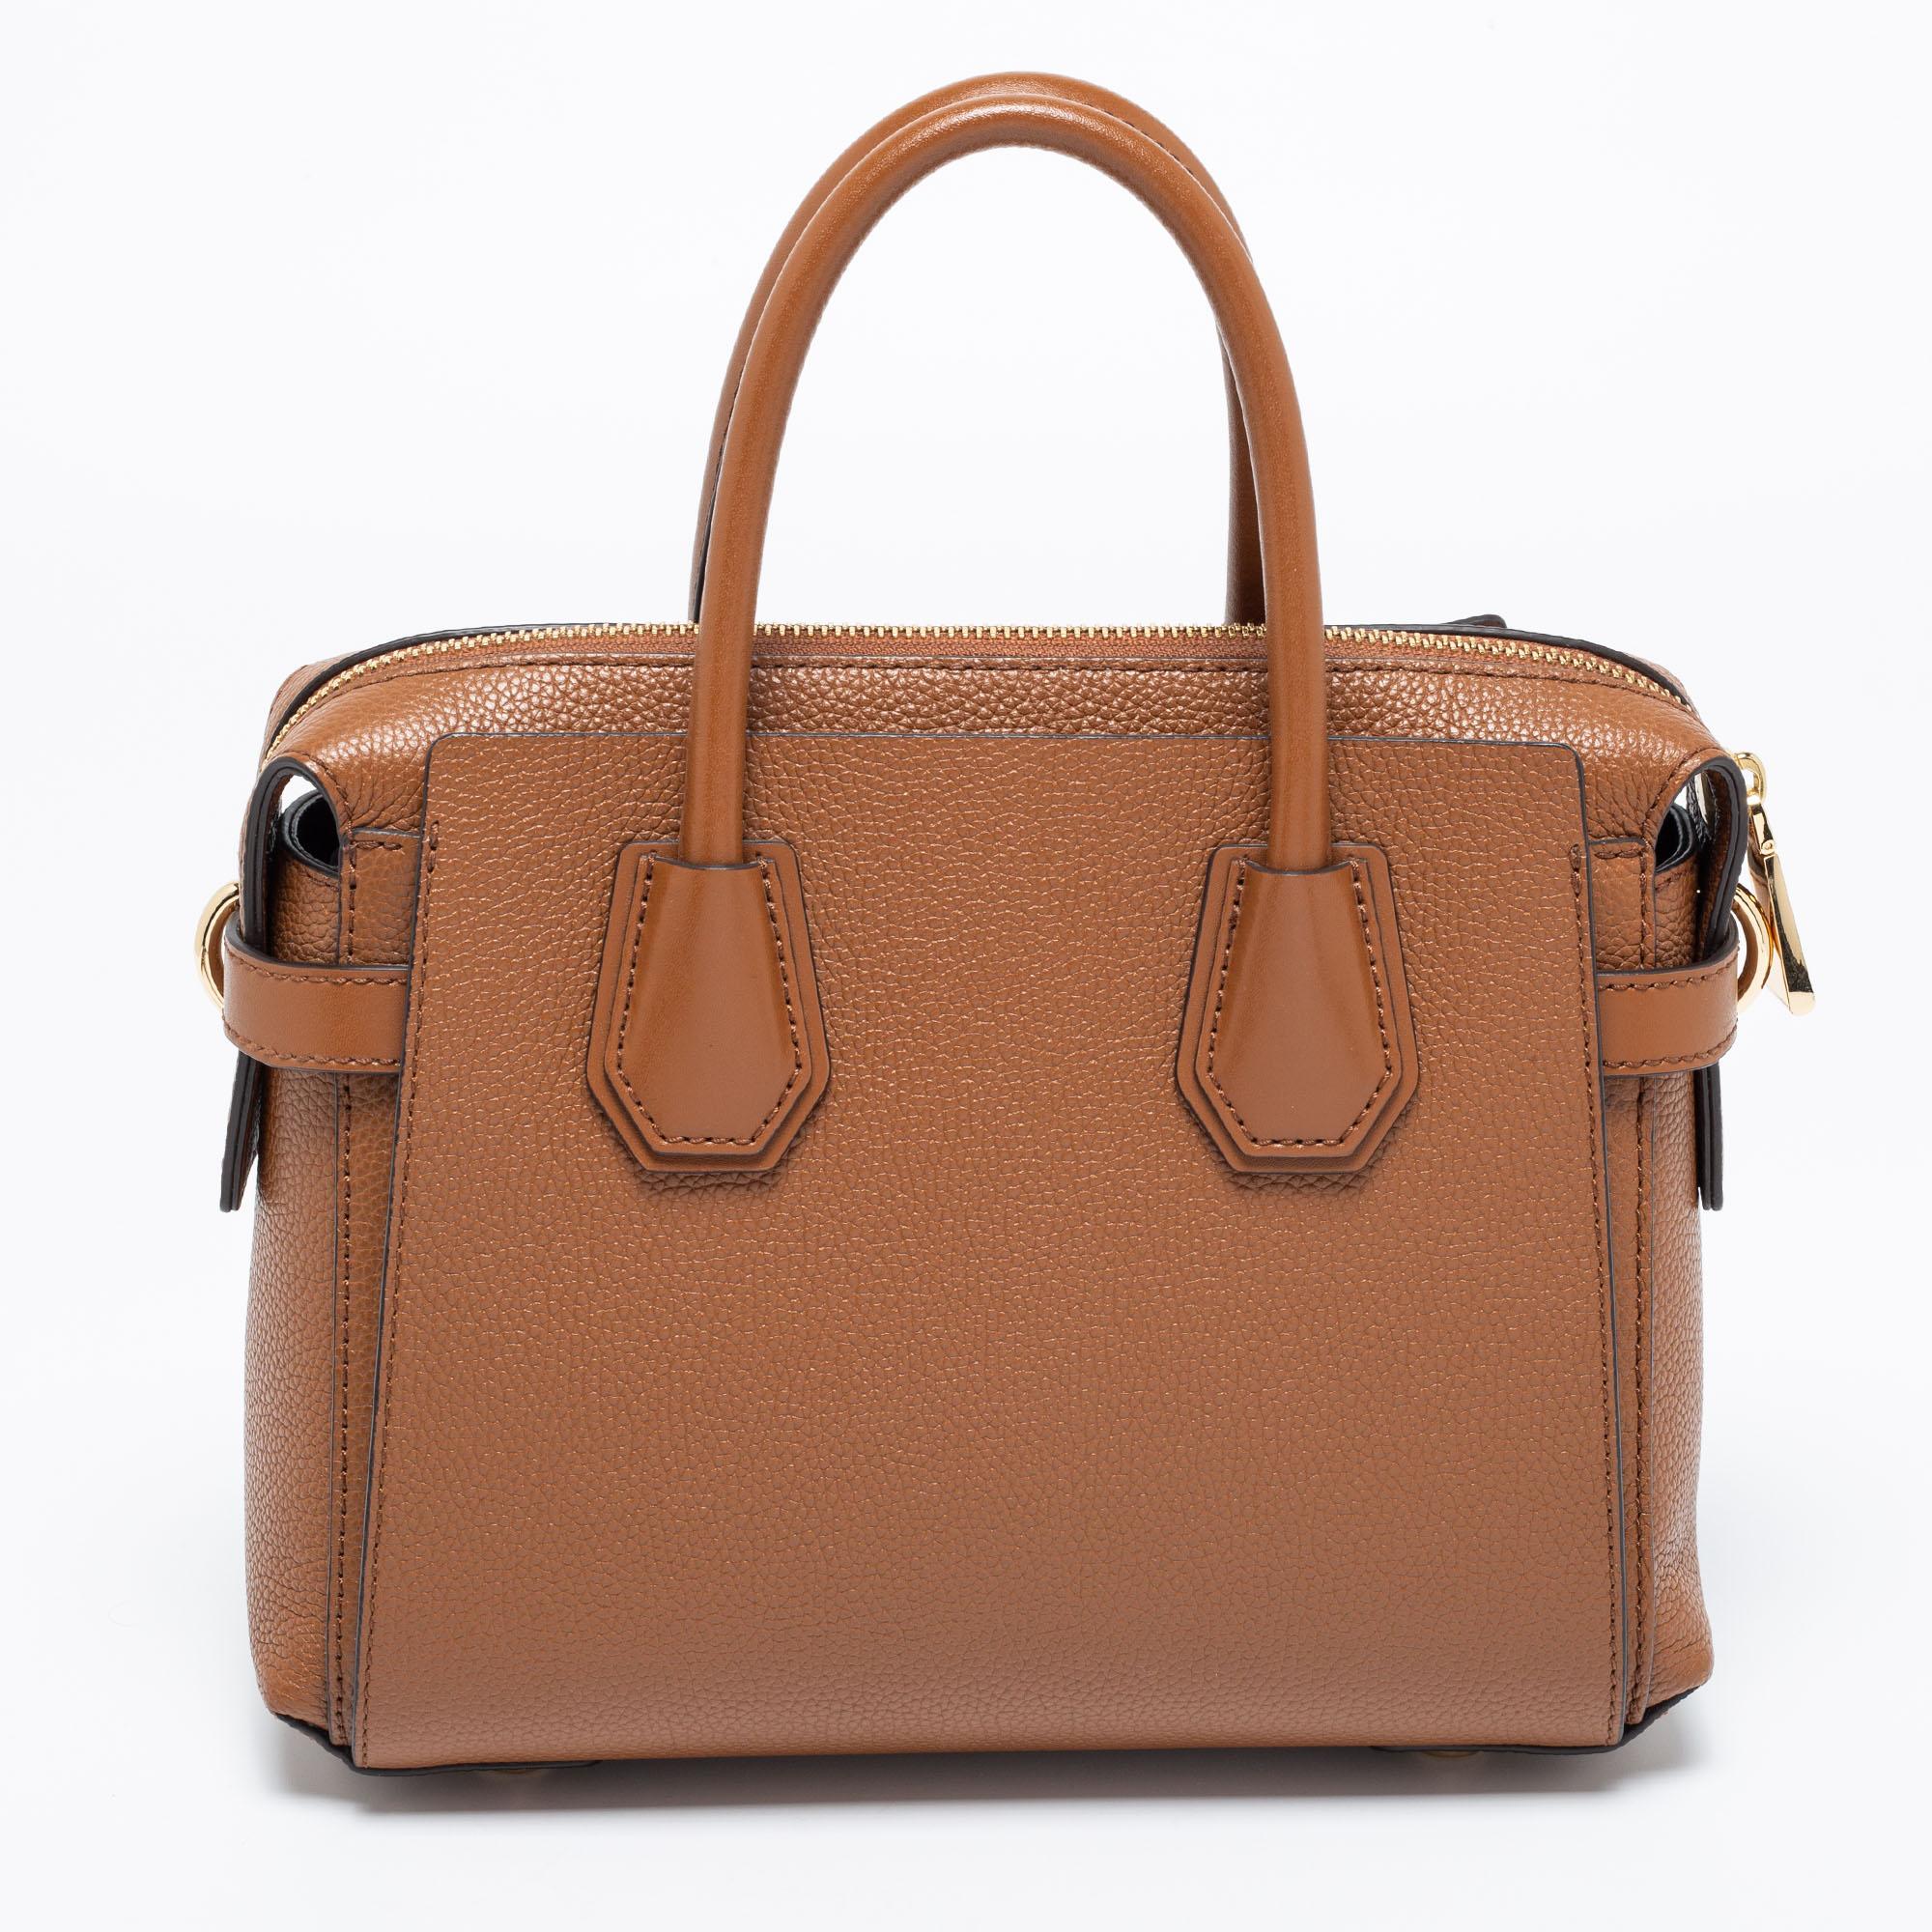 Featuring a chic and fabulous style, this Michael Kors tote is modern. Crafted from leather in a stunning tan hue, the bag features dual handles, a removable shoulder strap, and a padlock. It opens to a spacious interior having a zip pocket. It